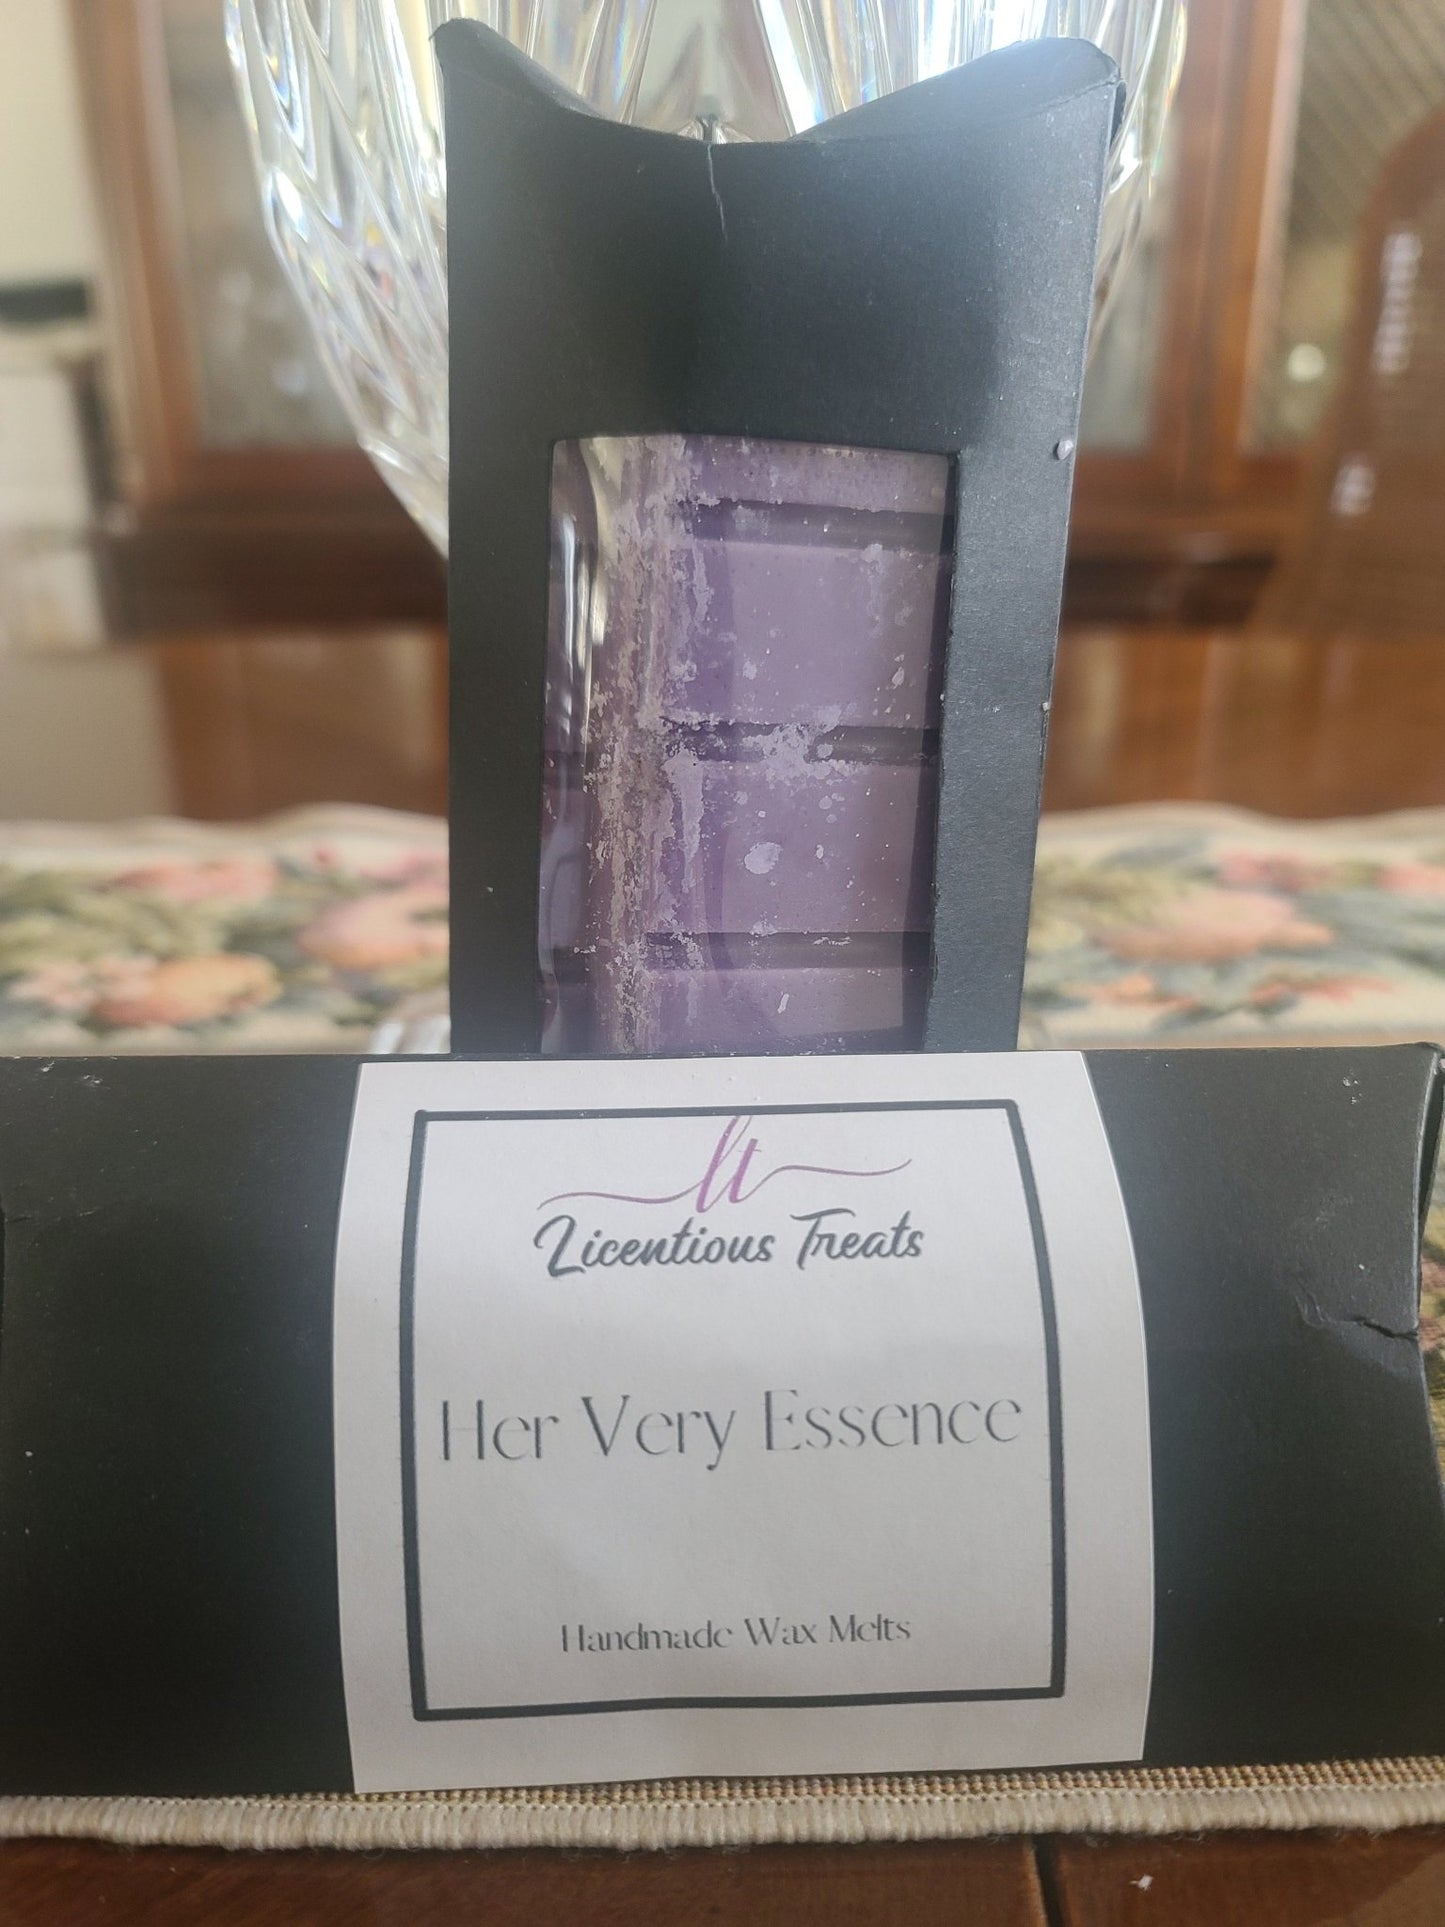 Wax Melts - Her Very Essence - Licentious TreatsWax Melts - Her Very Essence